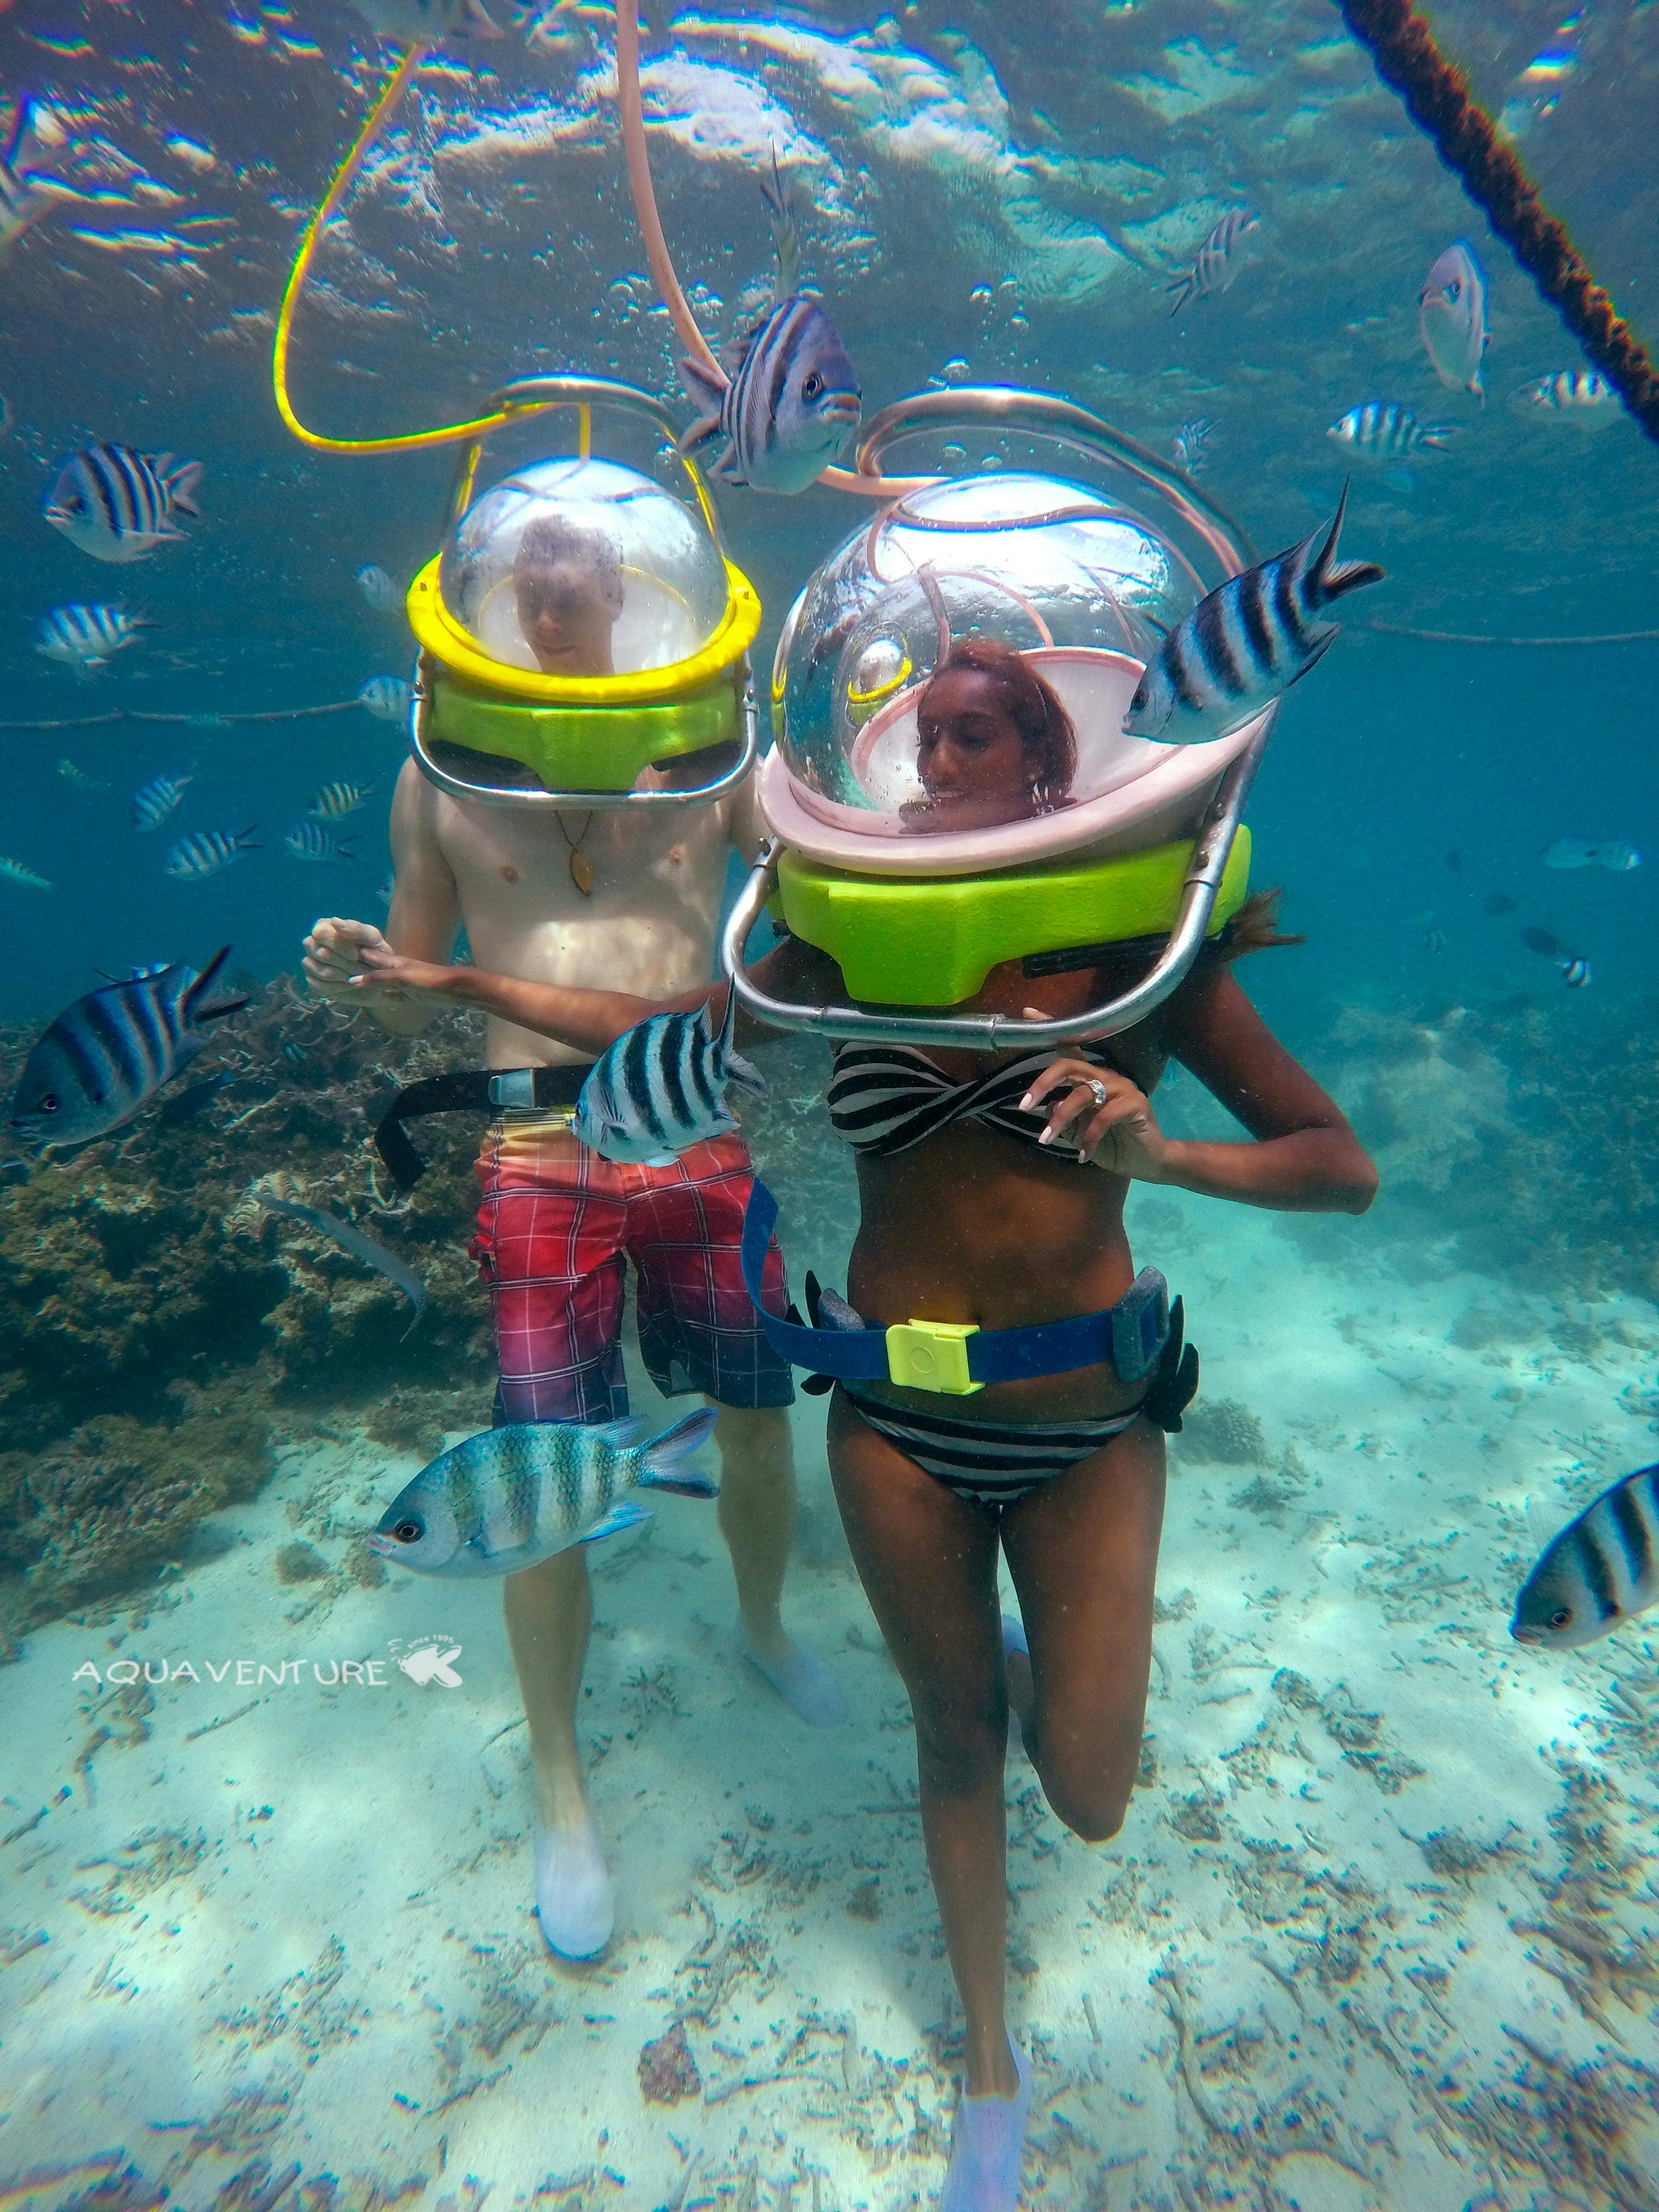 Walking under the sea in Mauritius with transfer